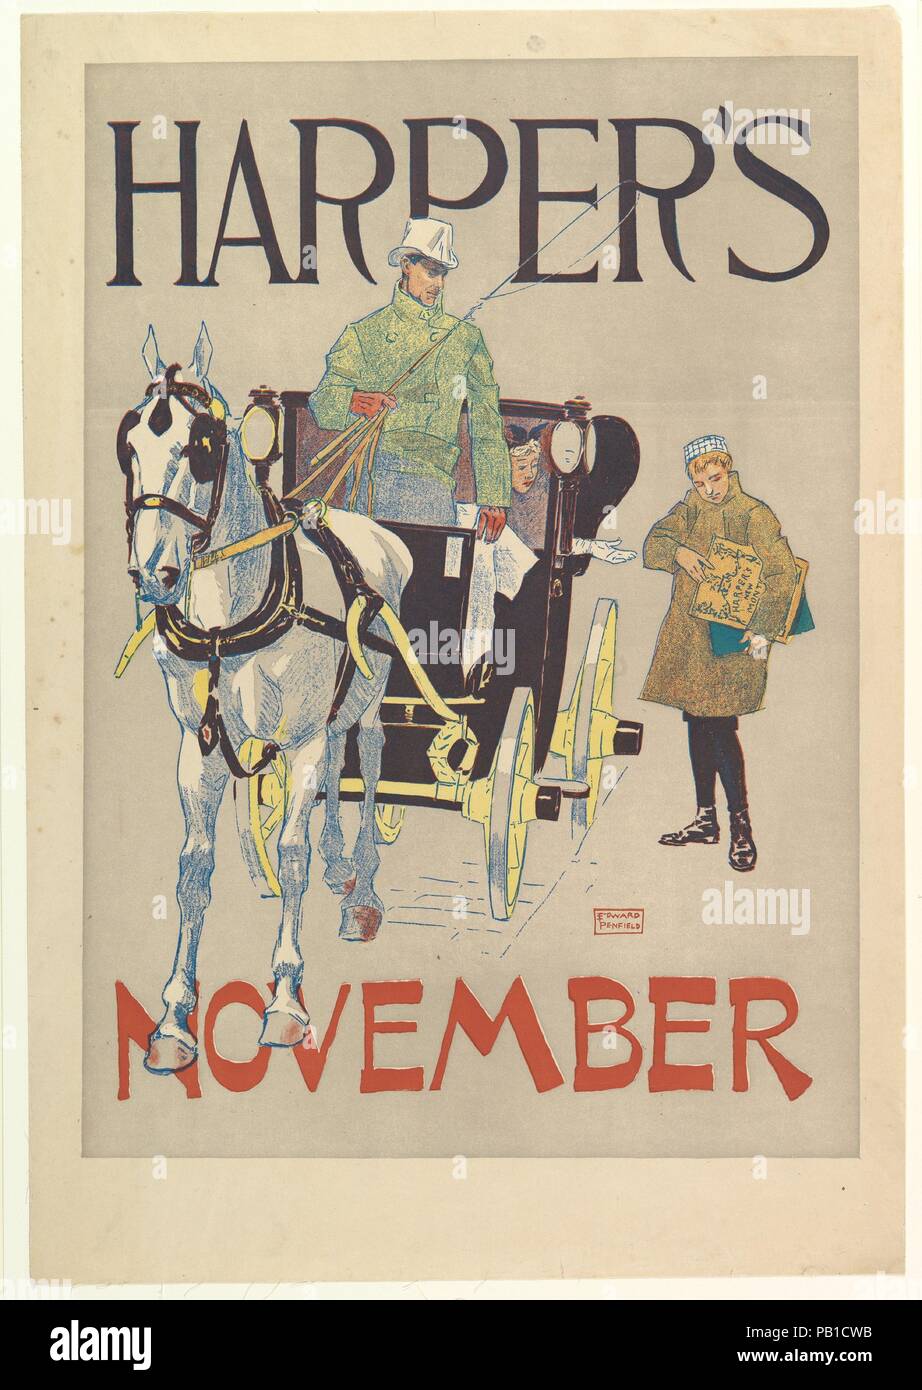 Harper's, November. Artist: Edward Penfield (American, Brooklyn, New York 1866-1925 Beacon, New York). Dimensions: Sheet: 19 1/2 × 13 9/16 in. (49.6 × 34.4 cm)  Image: 17 in. × 11 15/16 in. (43.2 × 30.4 cm). Publisher: Harper and Brothers, Publishers. Date: 1893. Museum: Metropolitan Museum of Art, New York, USA. Stock Photo